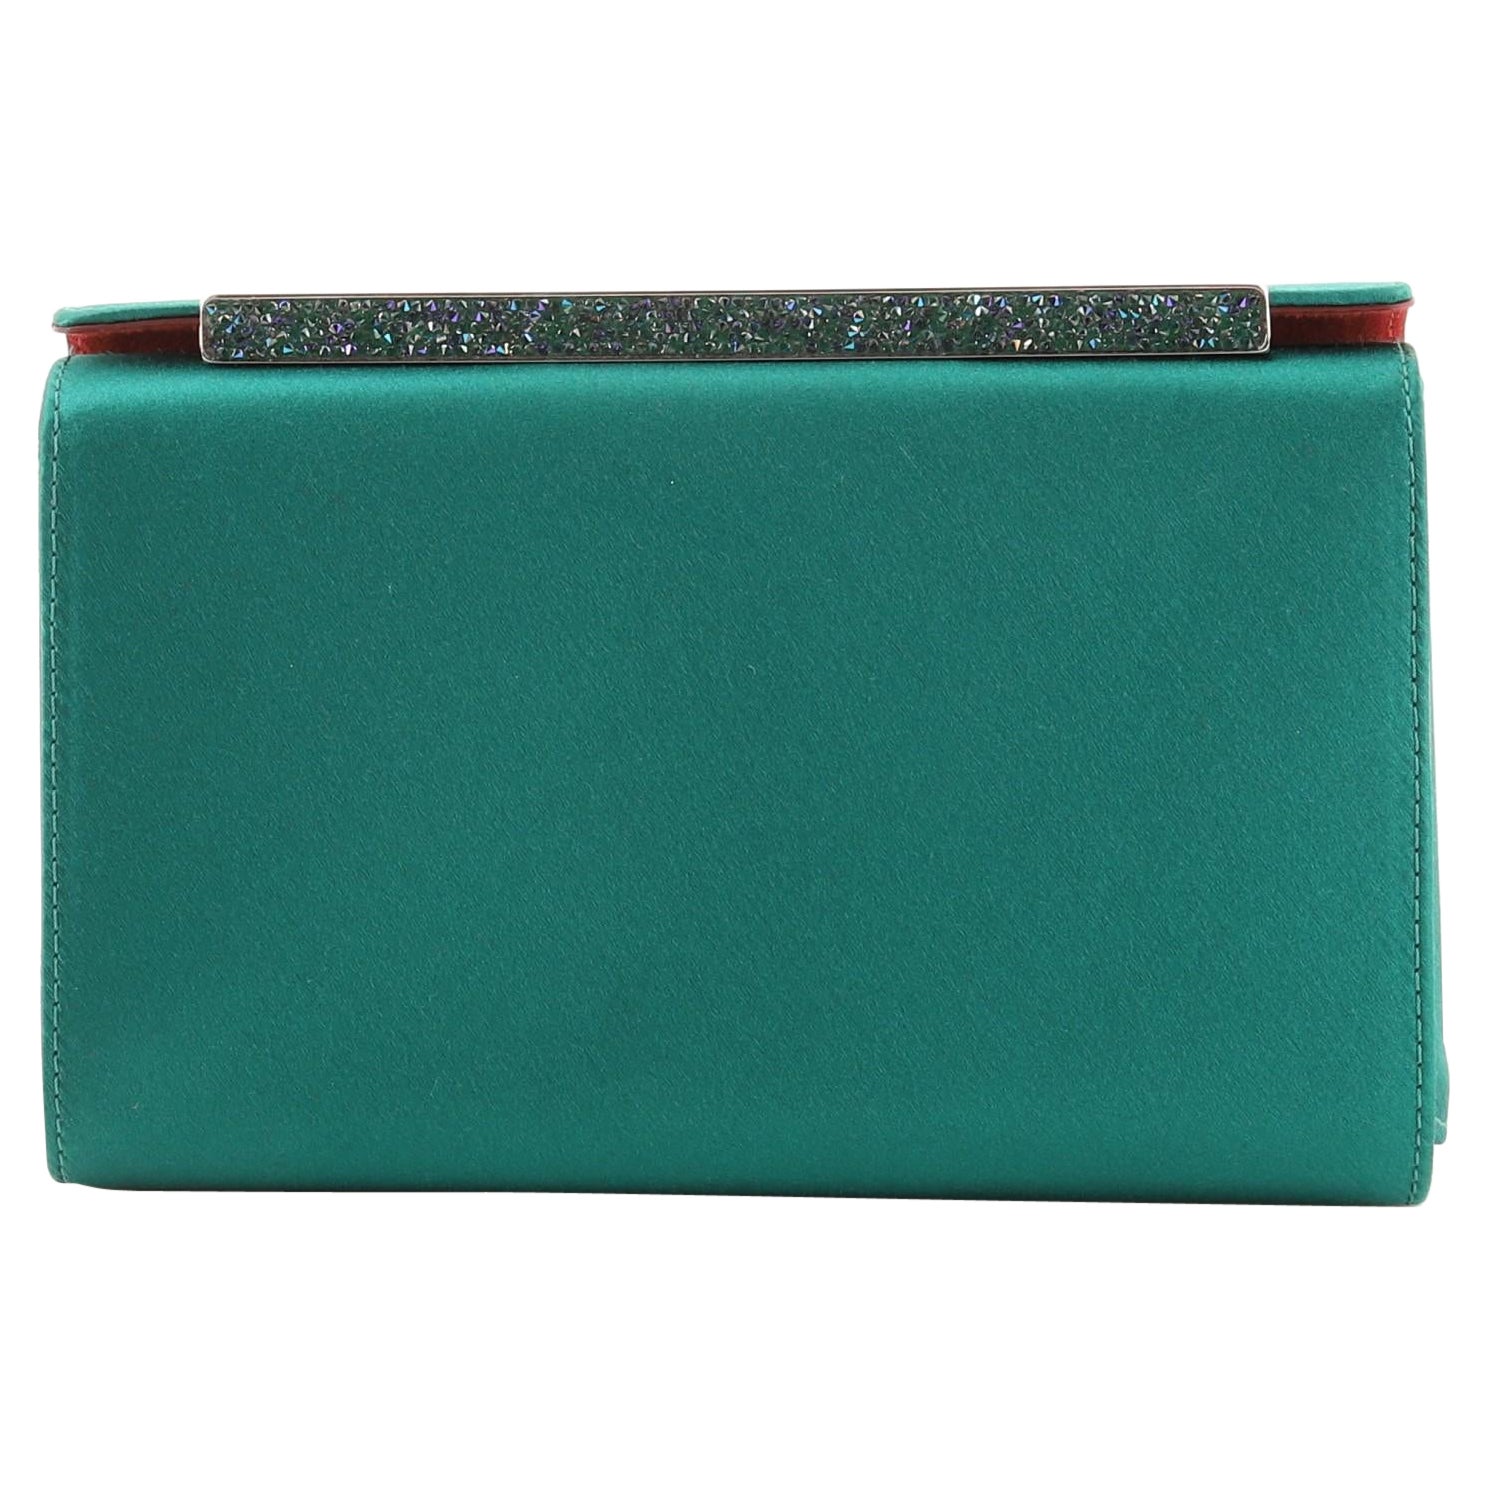 Christian Louboutin Vanite Clutch Satin with Crystals Mini